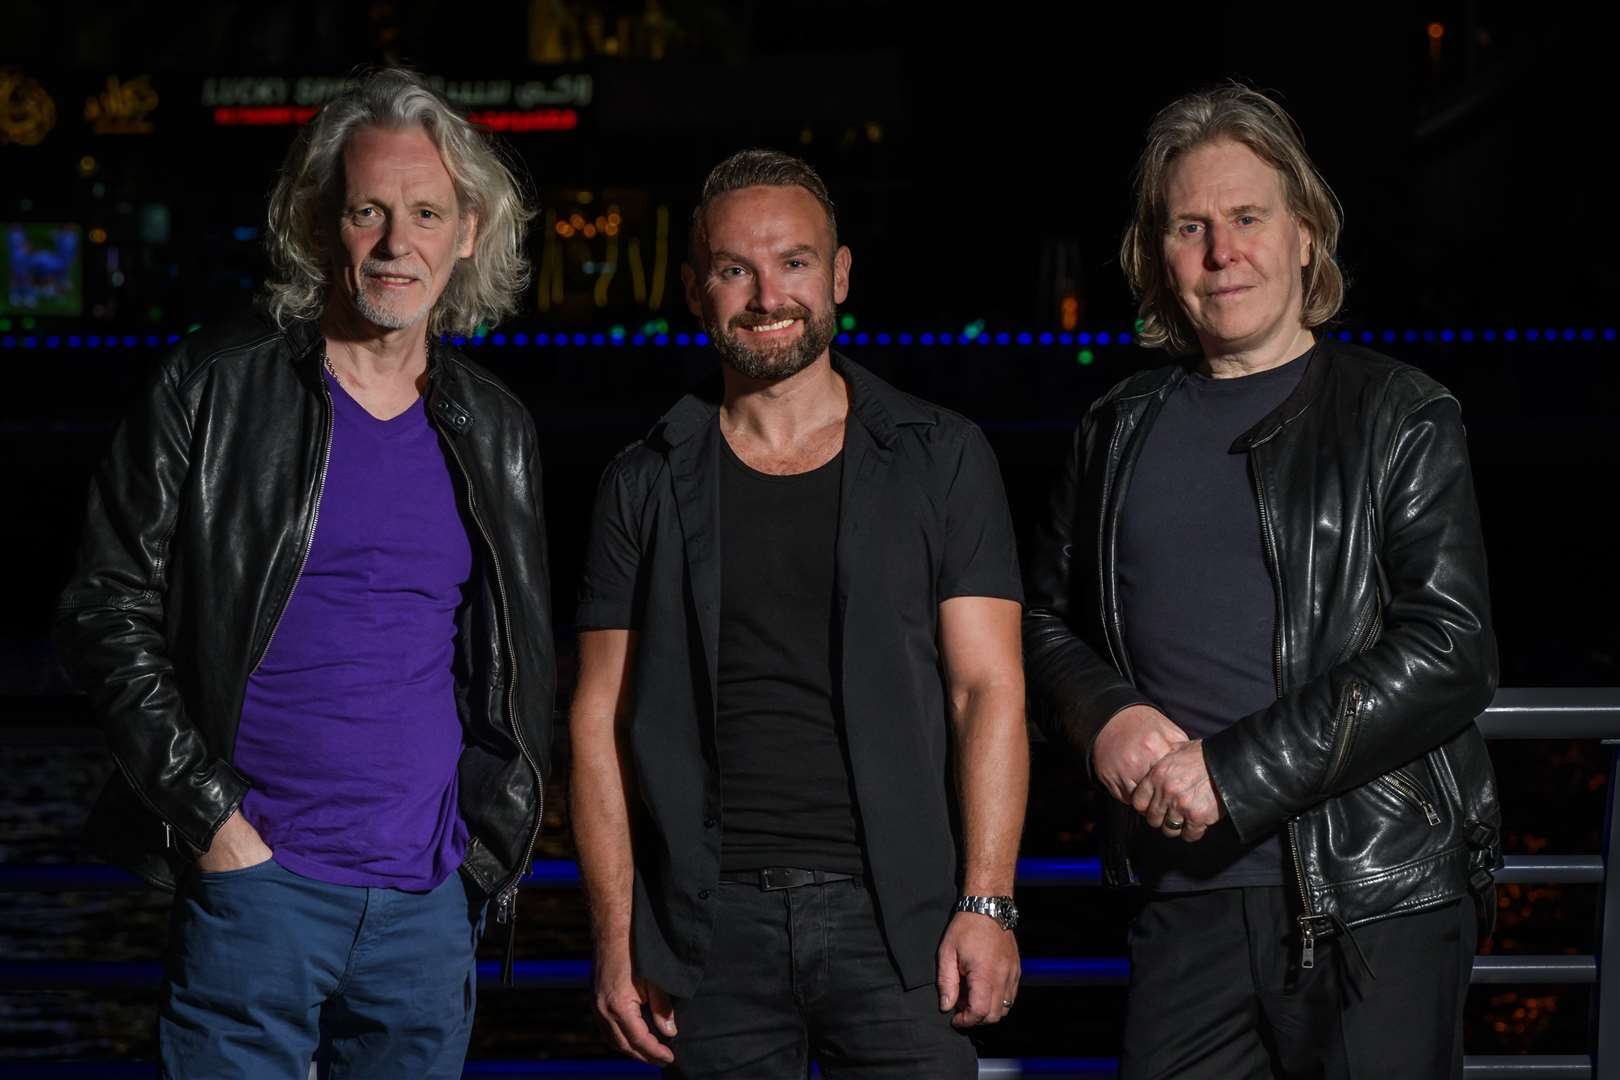 Wet Wet Wet are set to return to Aberdeen as part of their UK tour.